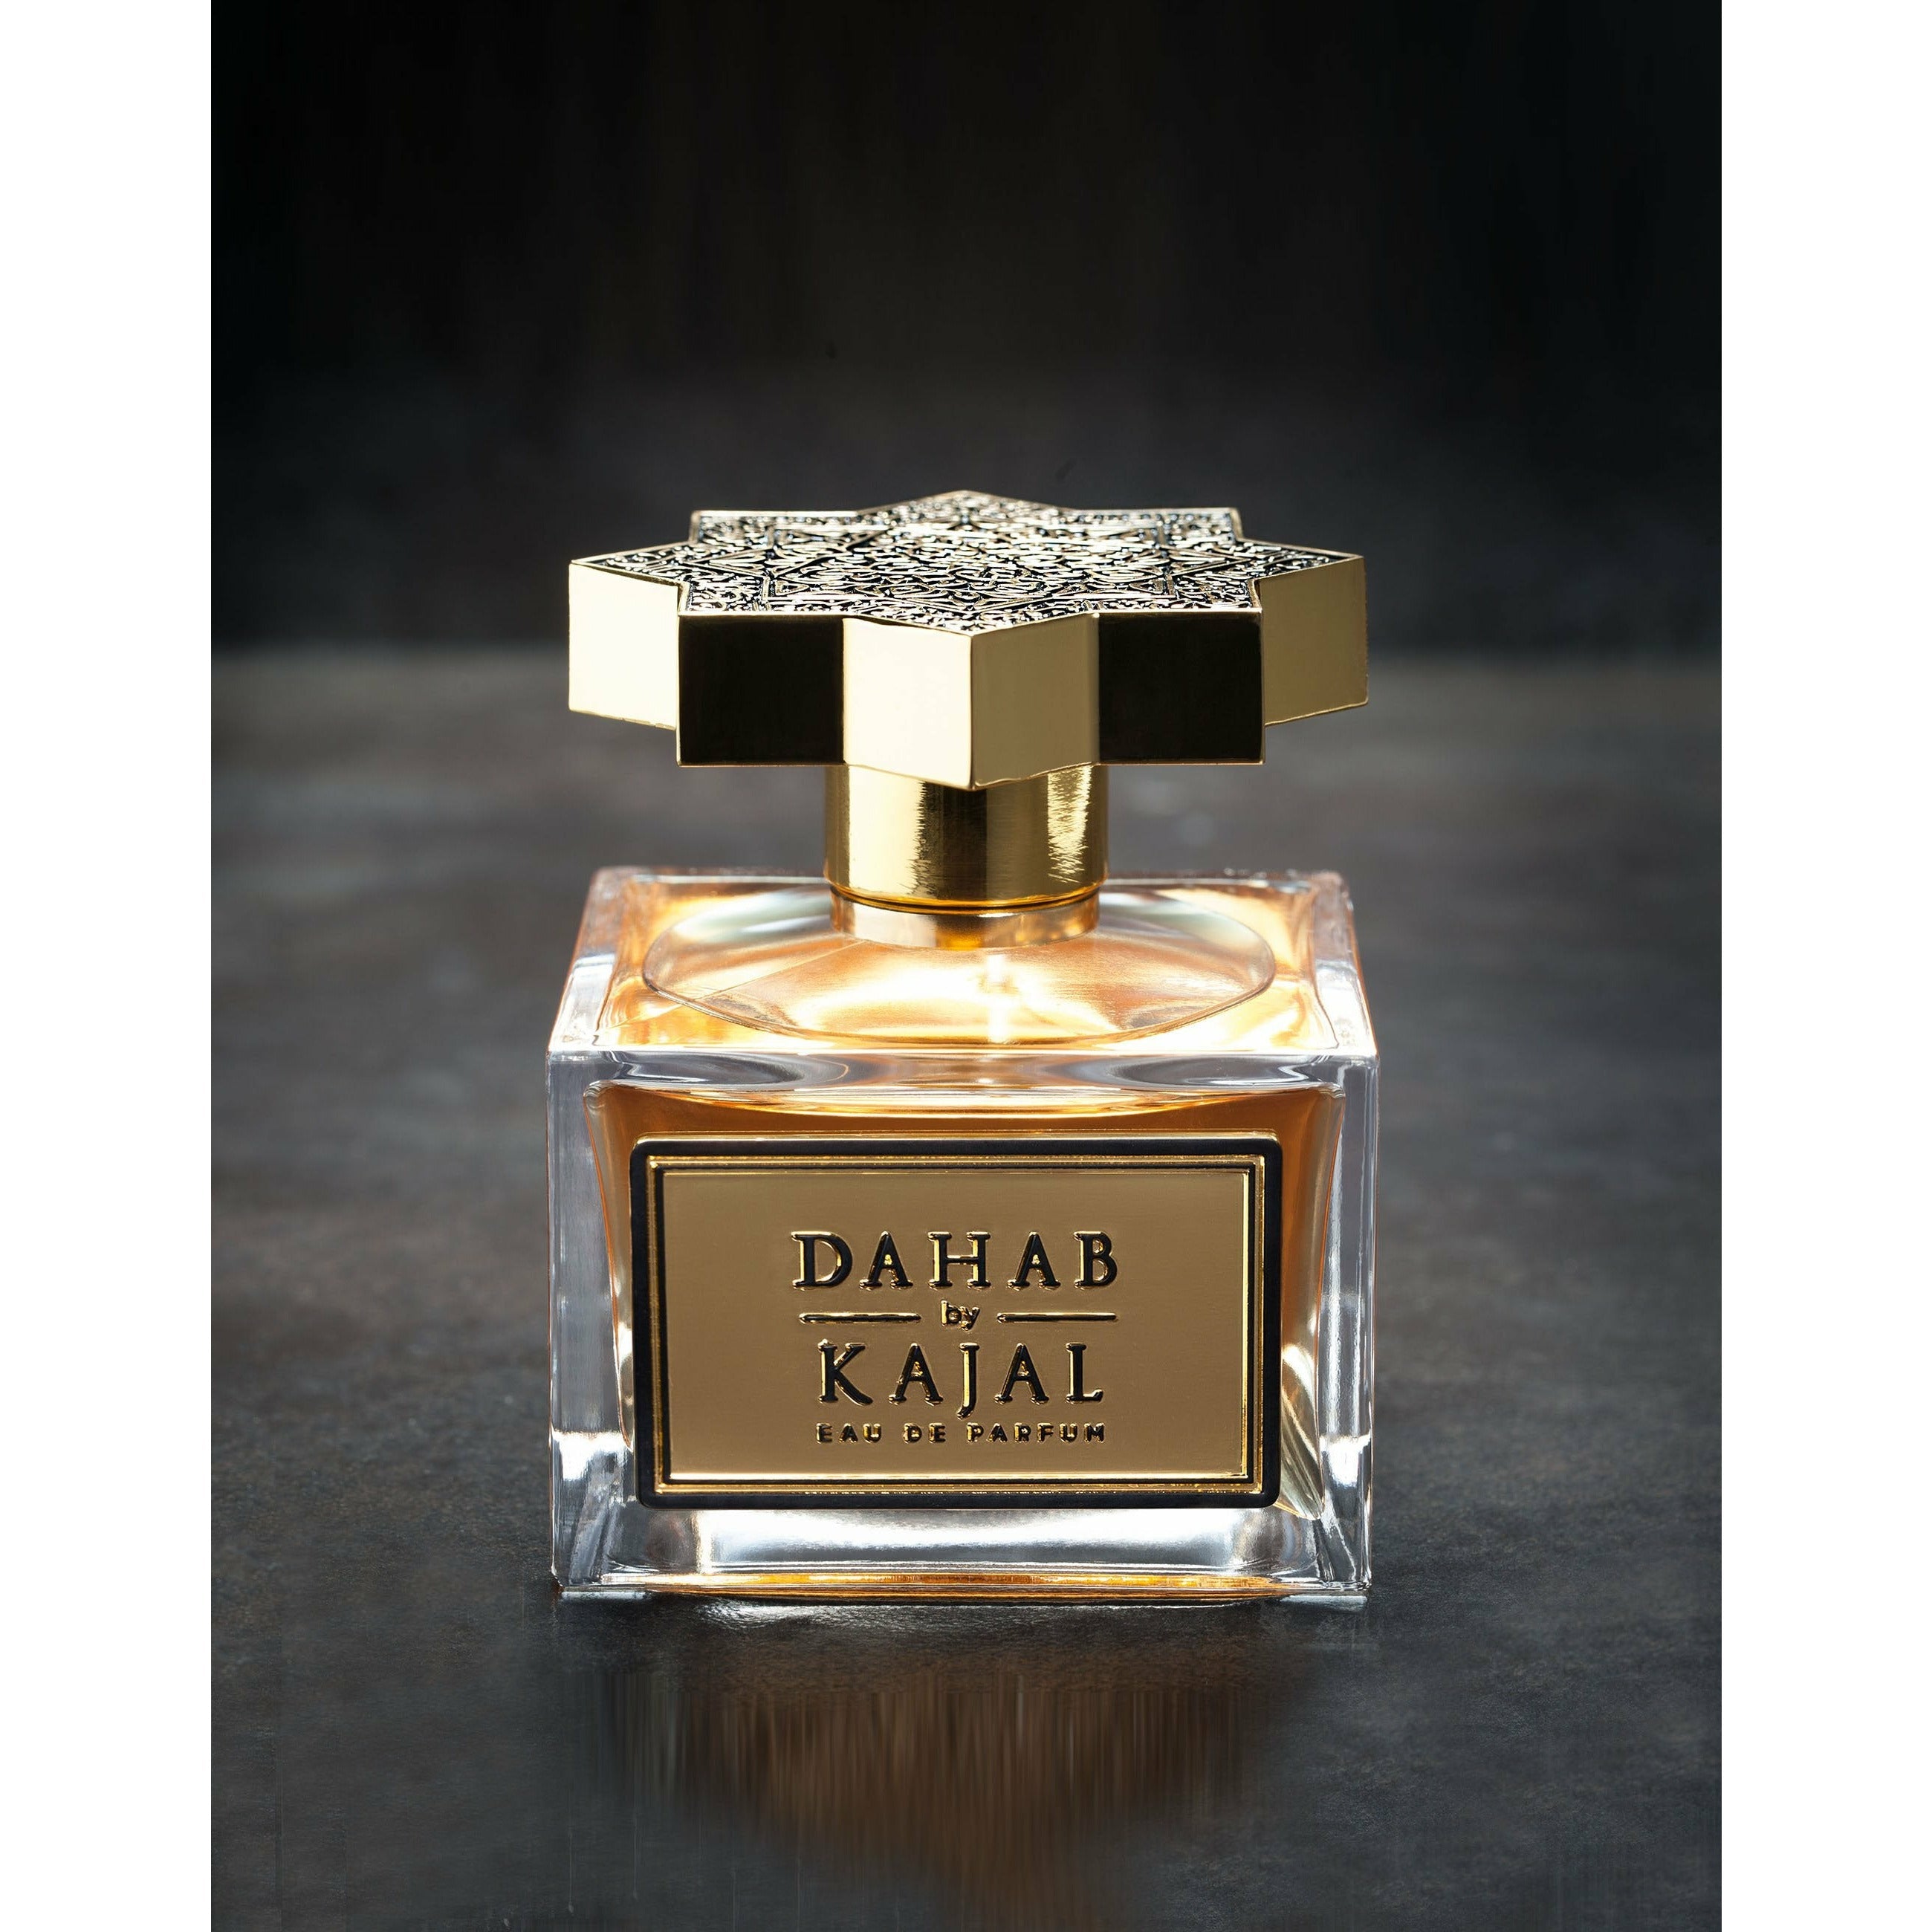 Clear glass cube bottle of Dahab 100ml with gold label and ornately engraved golden lid by Kajal perfumes.